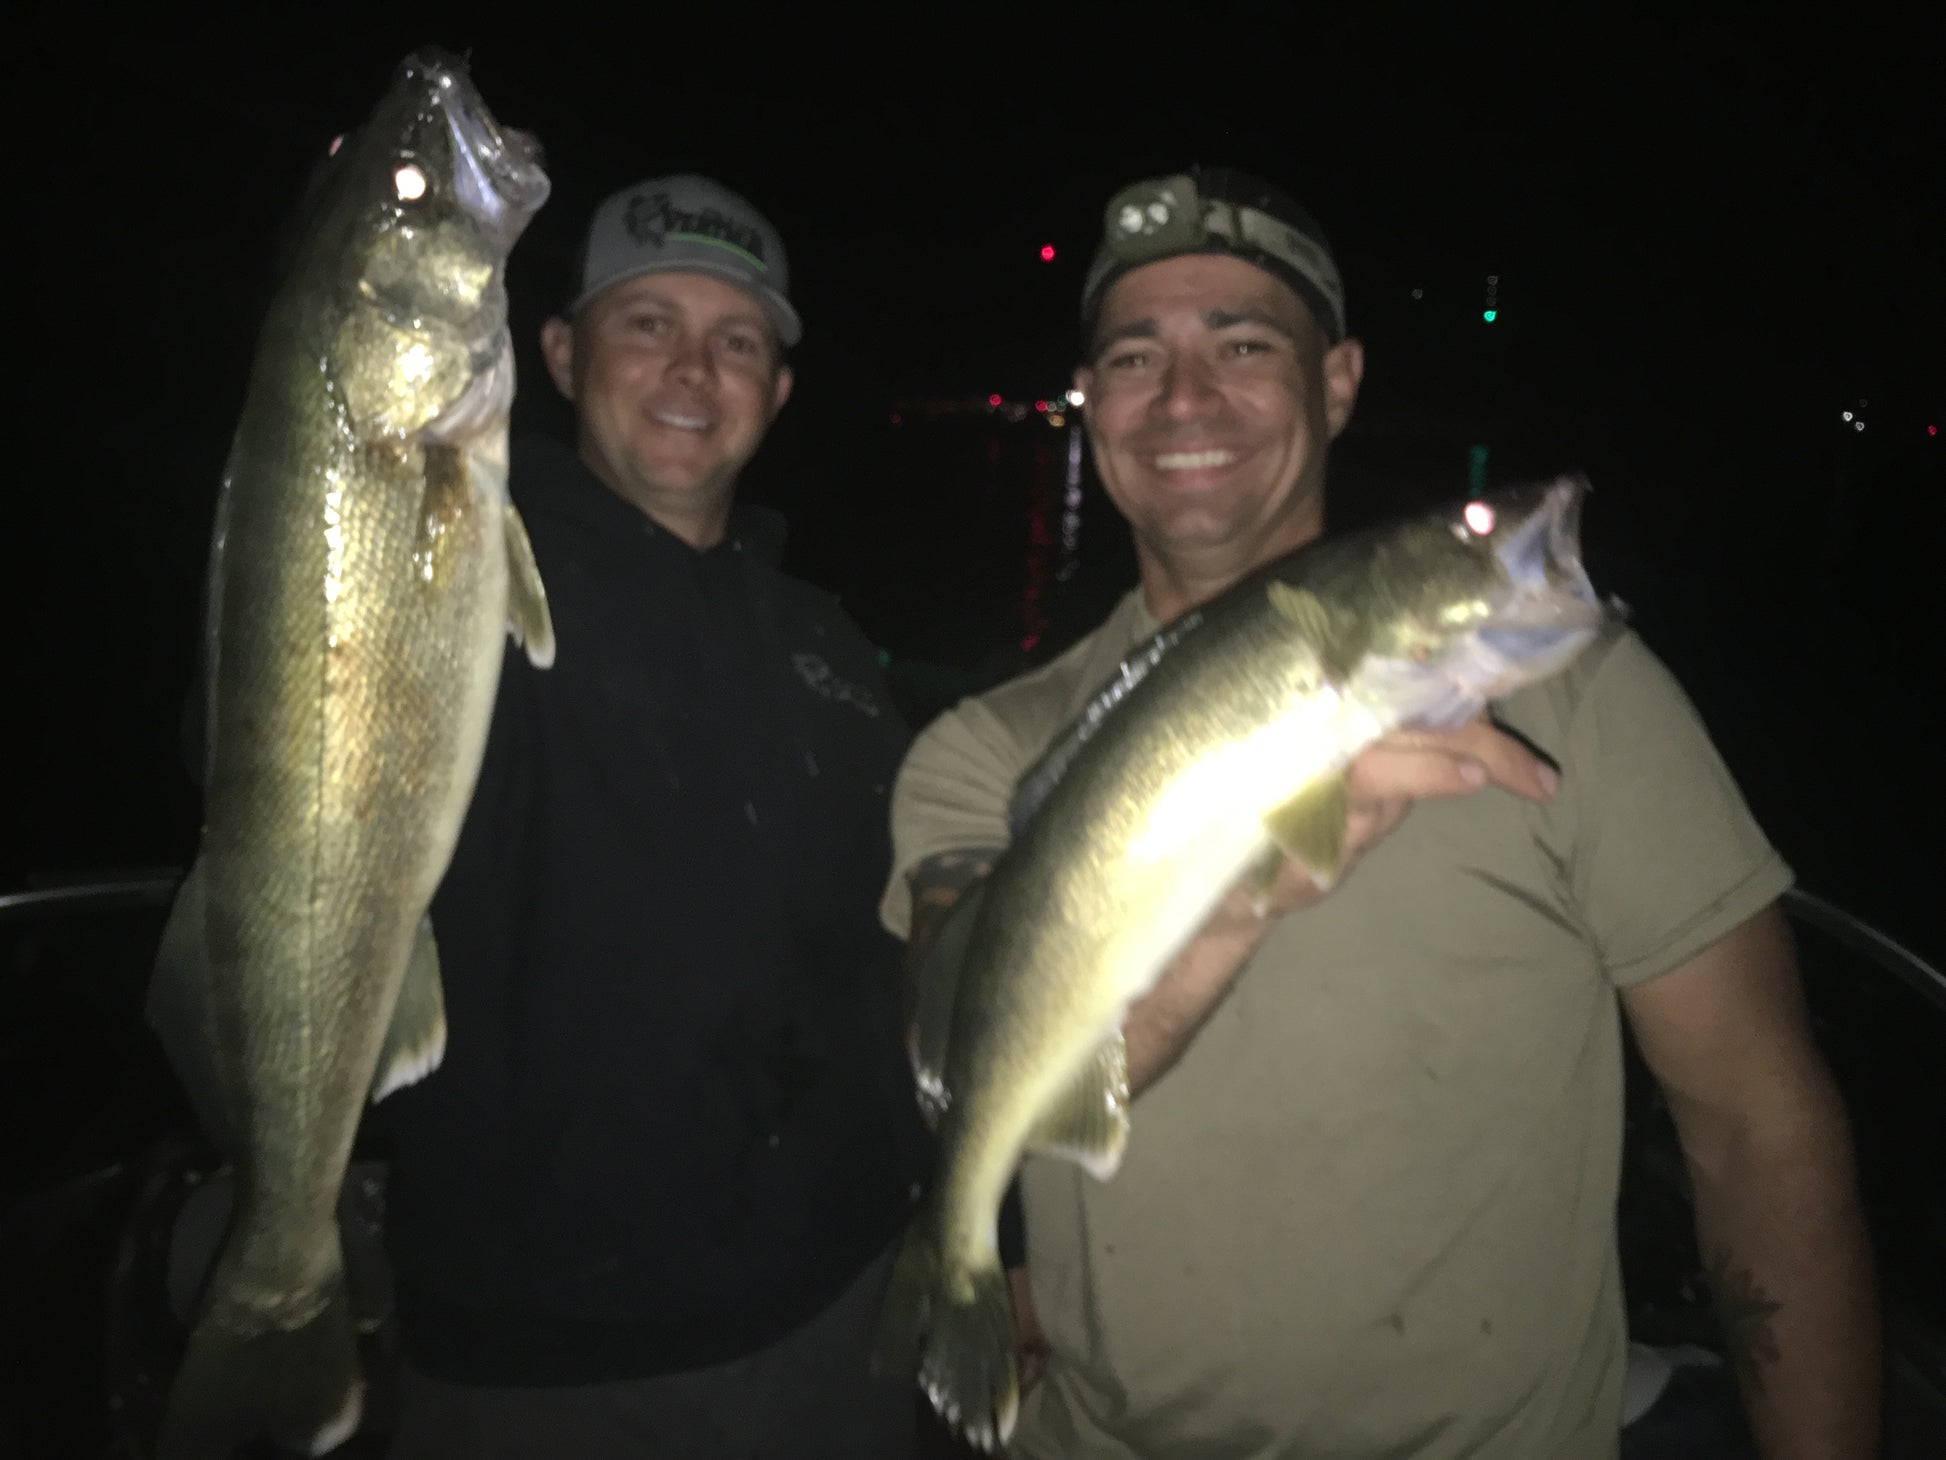 Vertical Jigs and Lures - Columbia River Walleye Guided Trip - Vertical Jigs and Lures Custom Guided Fishing Trip